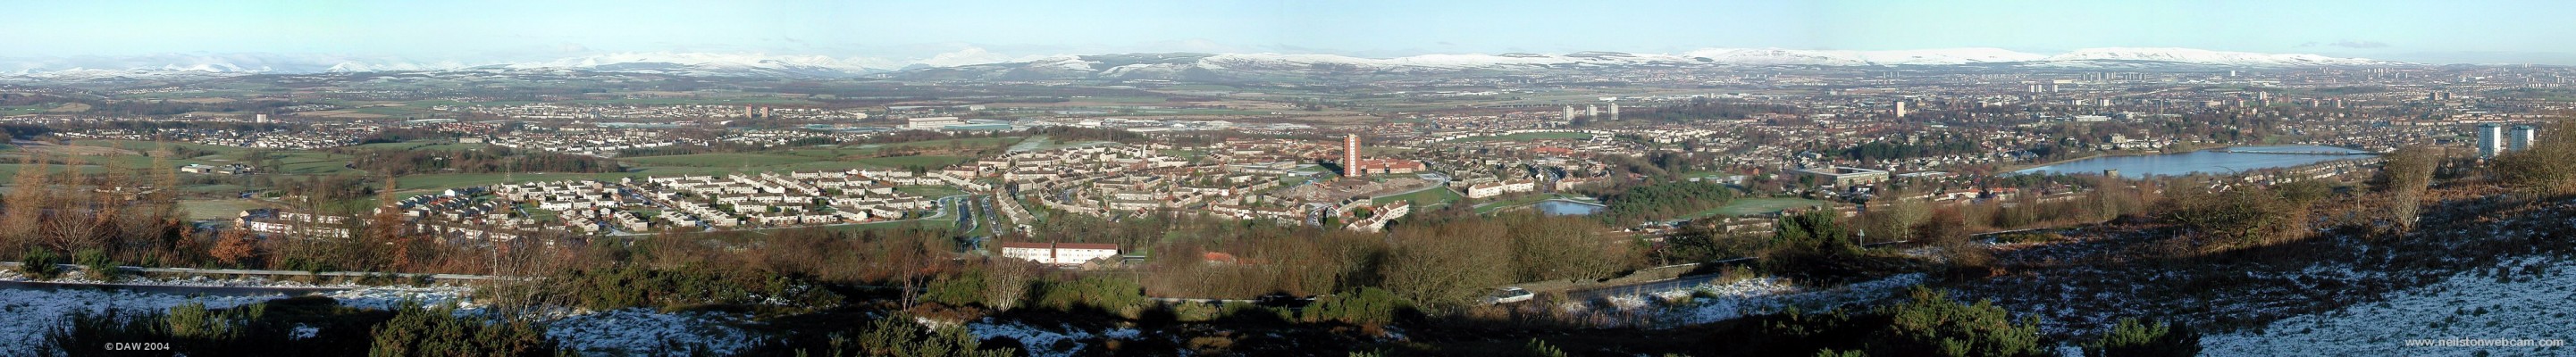 Winter panorama from Gleniffer Braes above Paisley
This view was taken in December 2004, on the extreme left is Johnstone, in the centre is the Foxbar area of Paisley with the remaining tower block in the centre.  Paisley is spread out behind this with Glasgow in the distance on the right.  The snow capped peak of Ben Lomond can clearly be seen in the distance to the left of the foxbar tower block.
